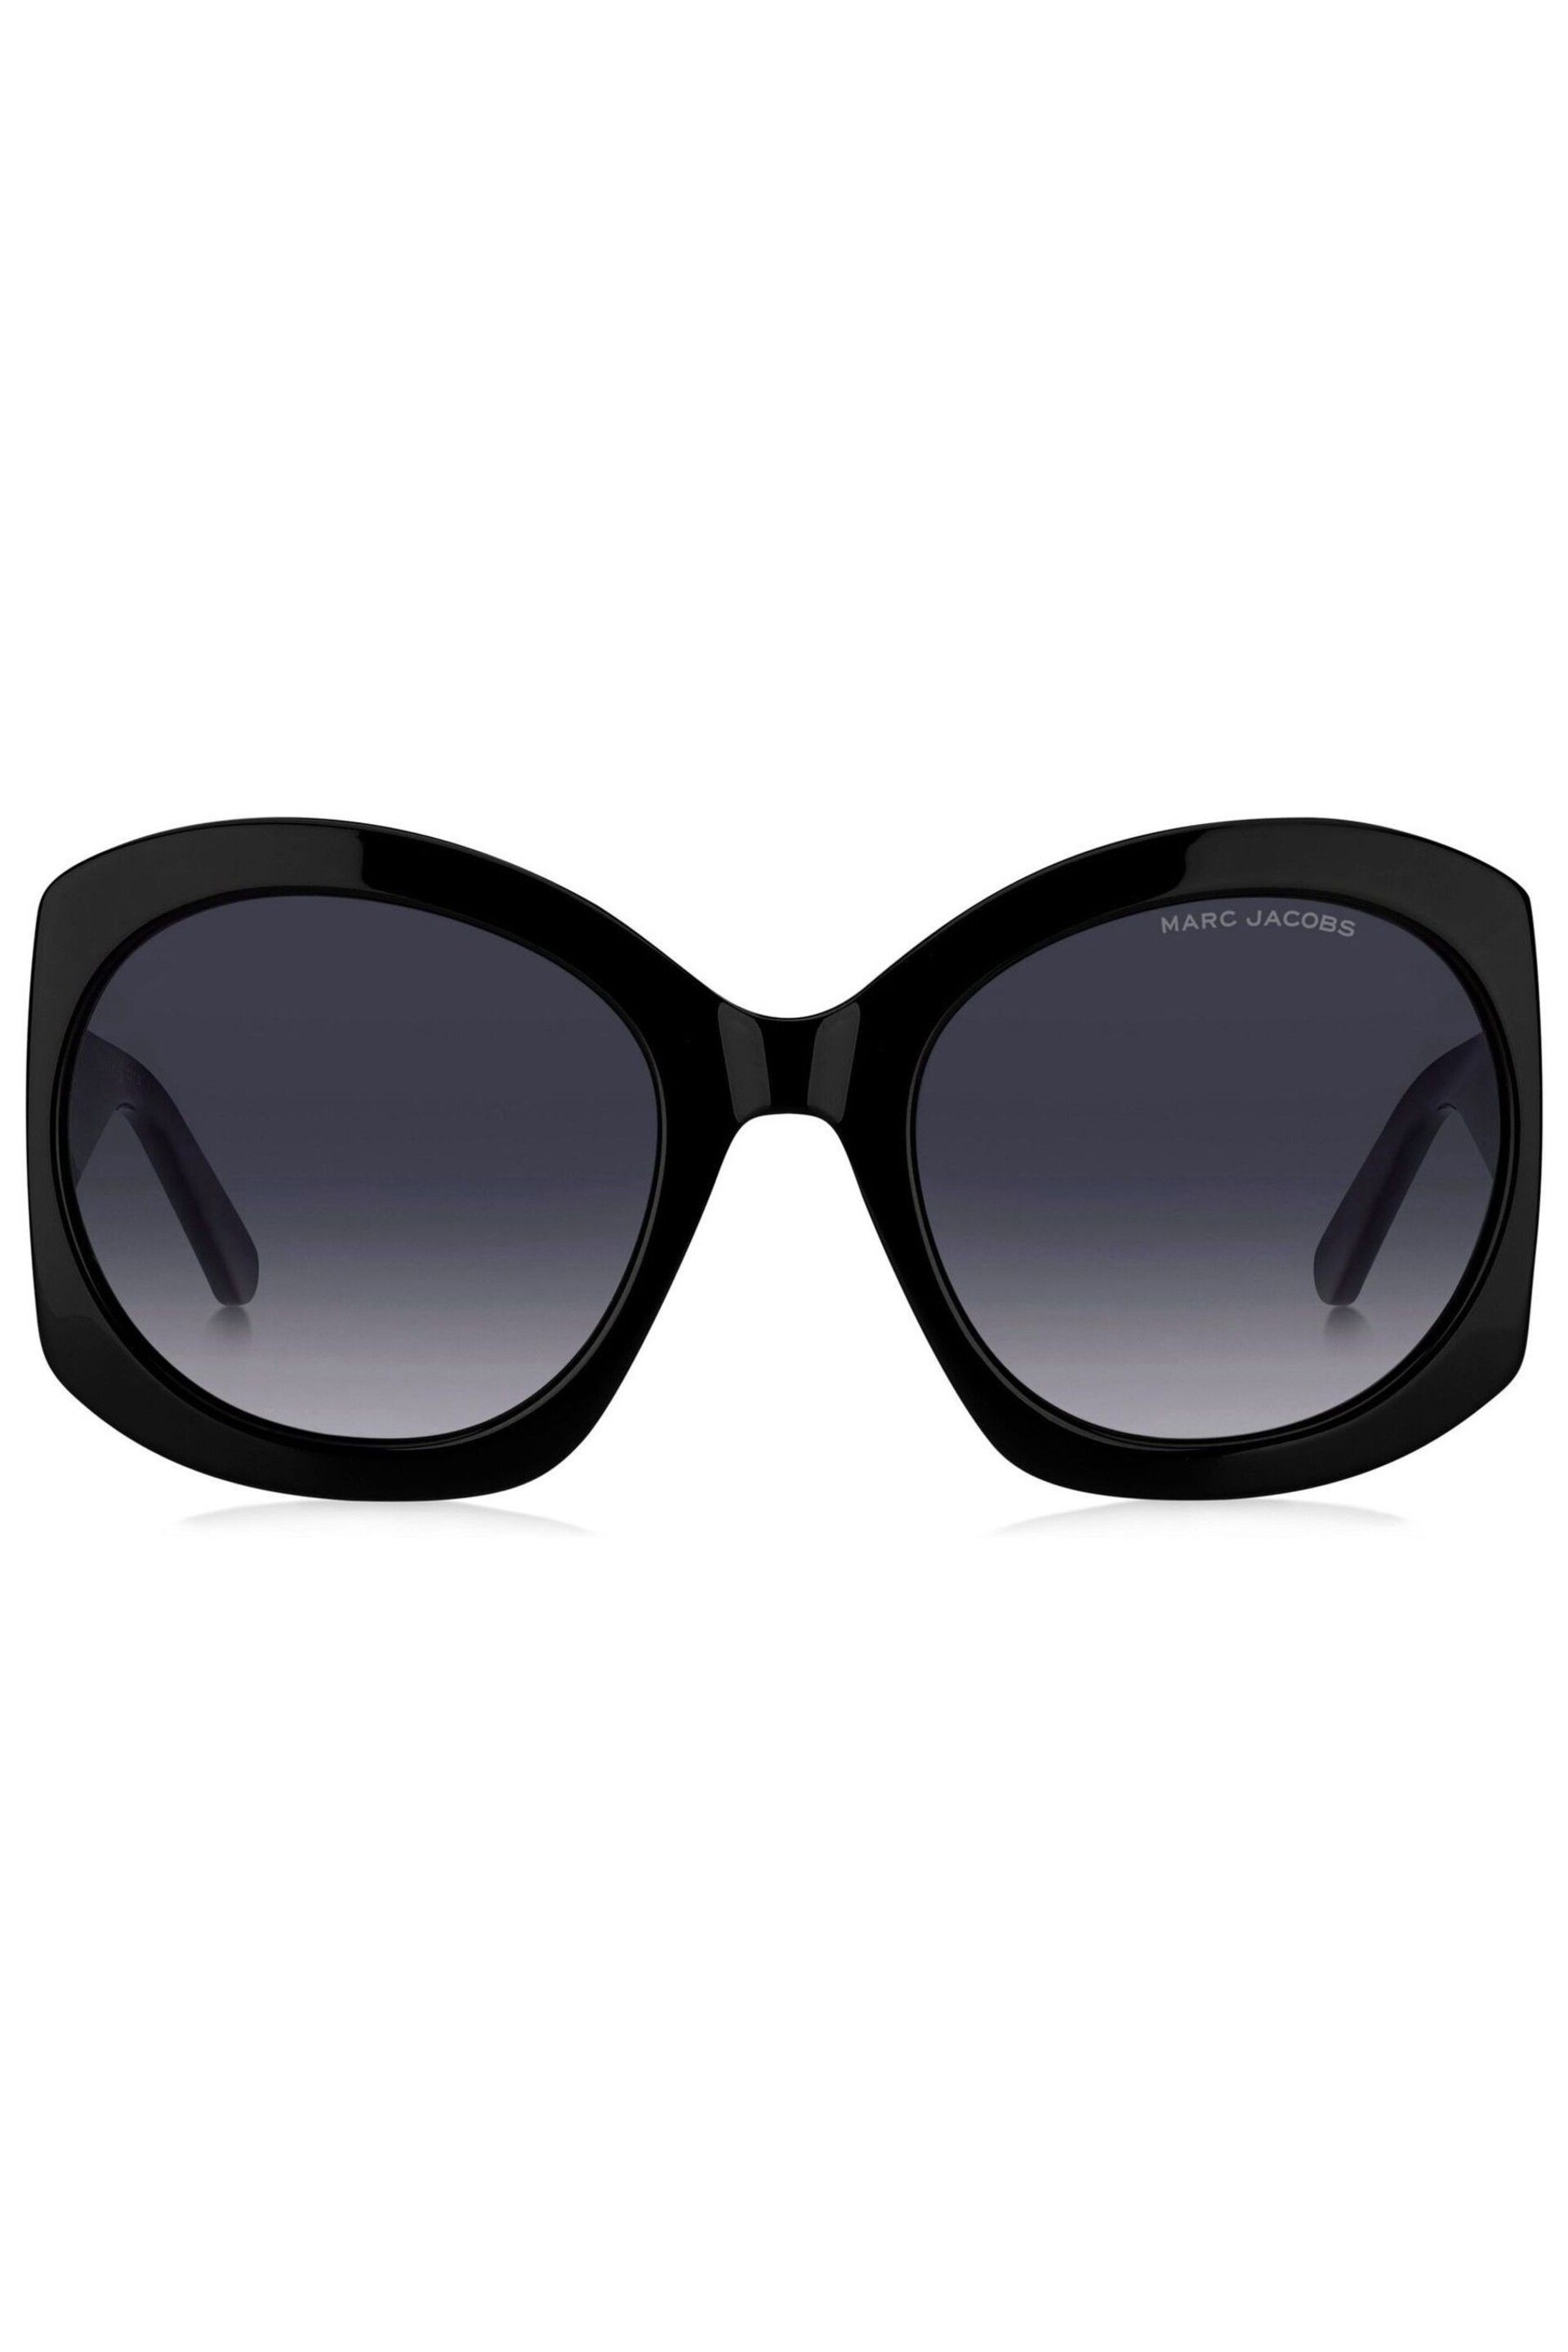 Marc Jacobs 722/S Butterfly Black Sunglasses - Image 2 of 4